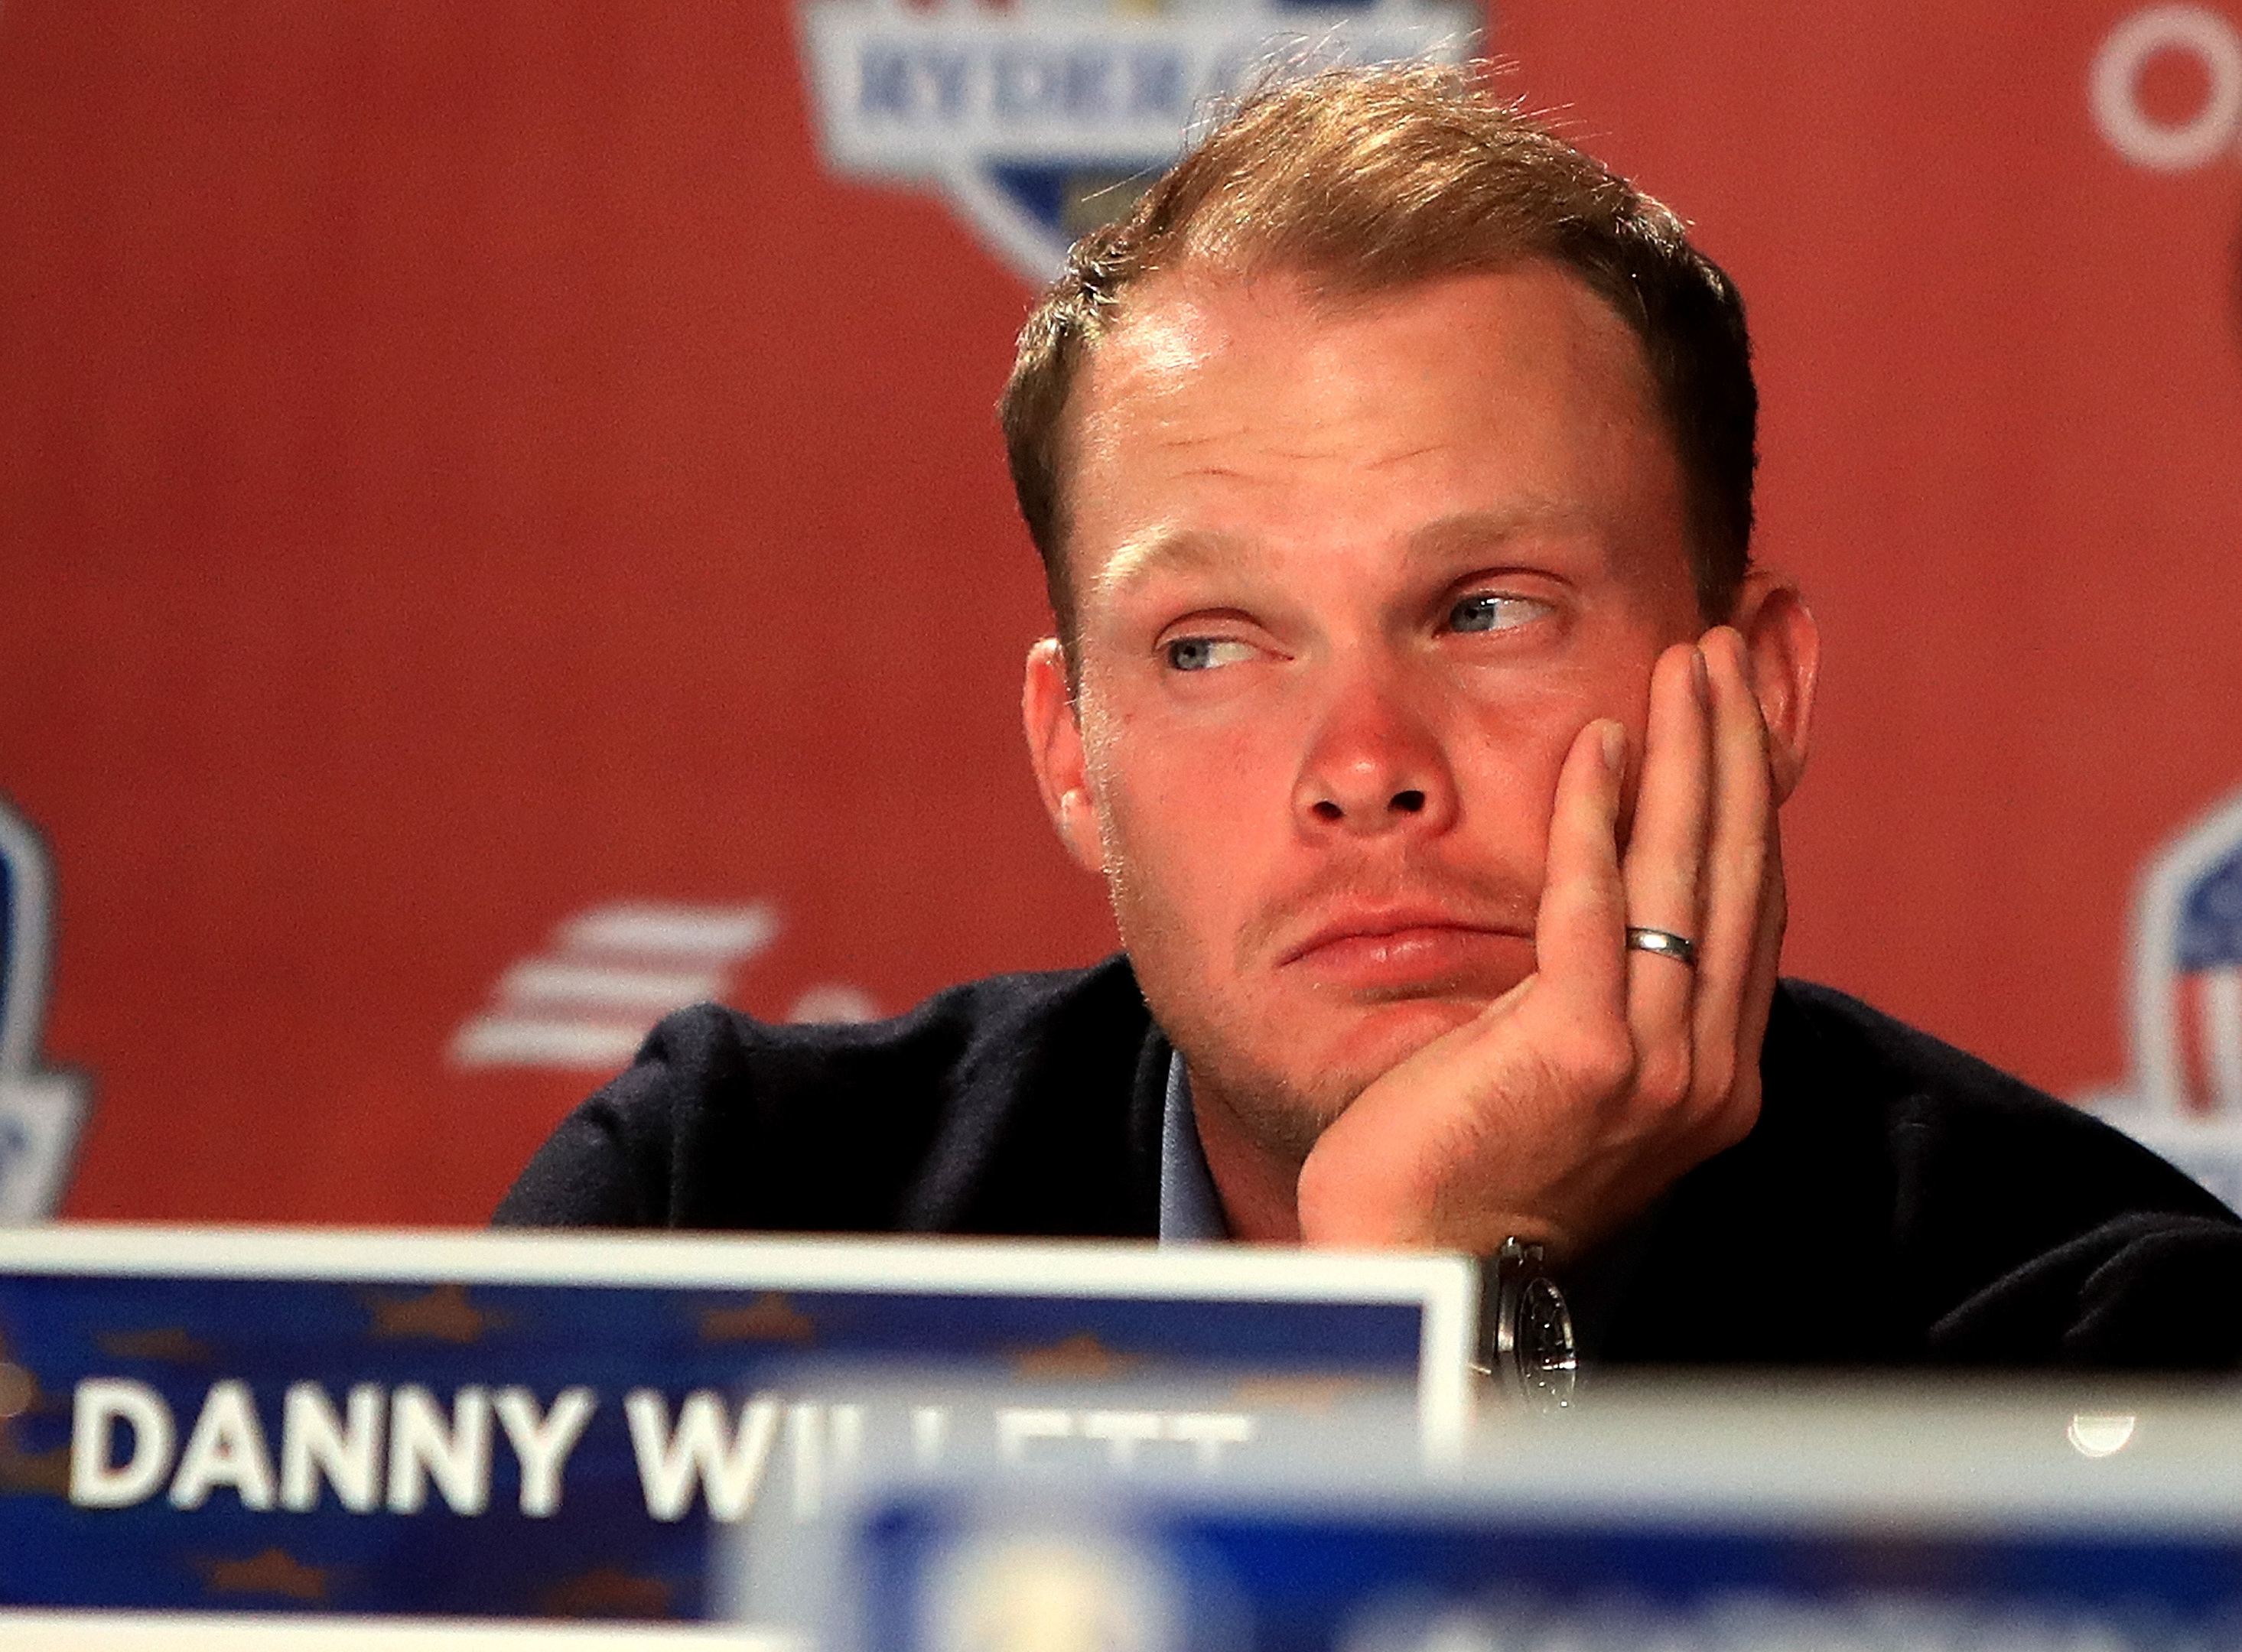 Danny Willett didn't enjoy his first Ryder Cup experience much.